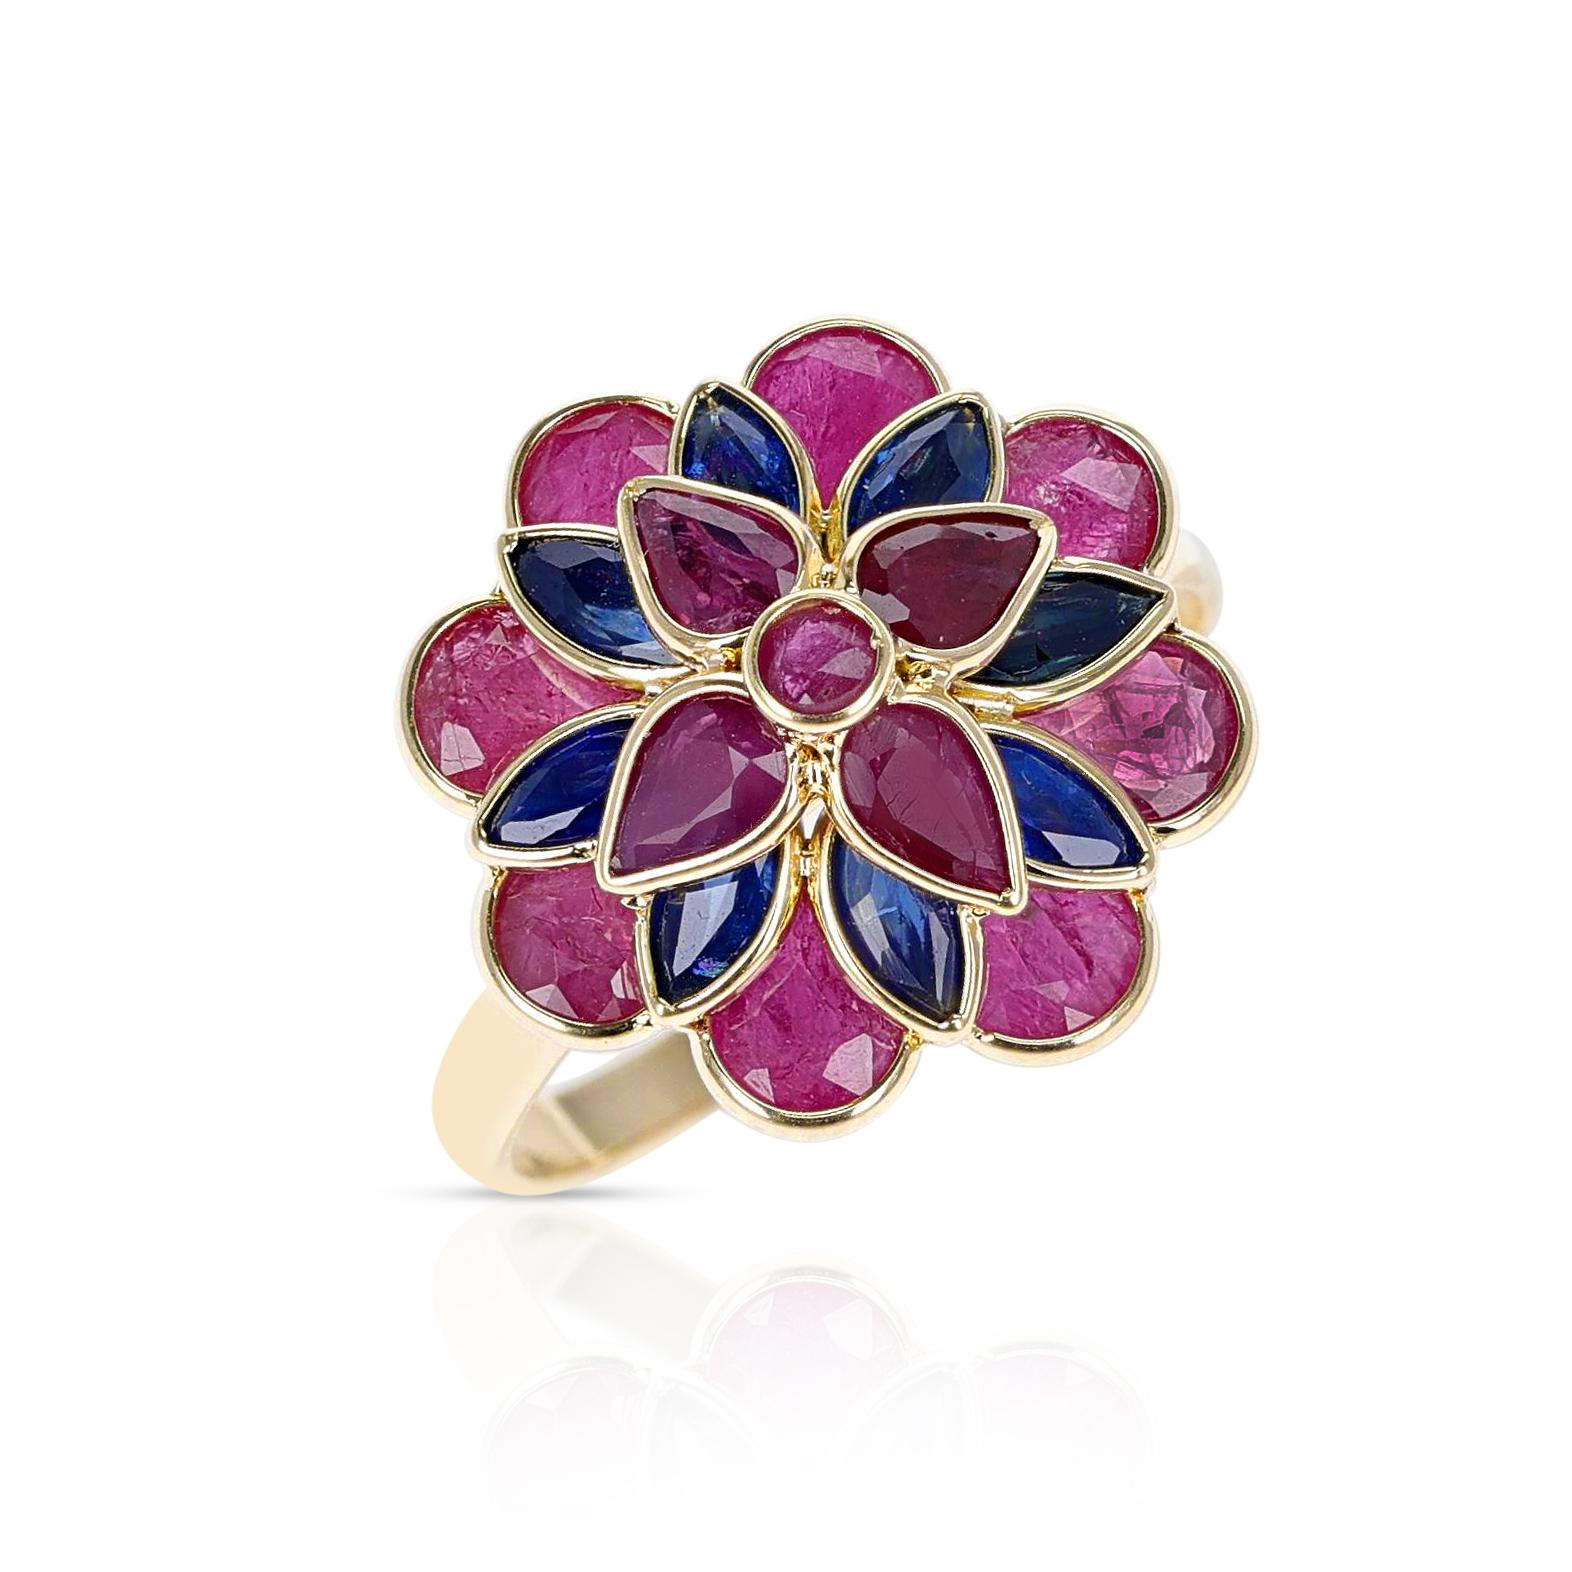 Marquise Cut Ruby and Sapphire Floral Ring, 18K Yellow Gold